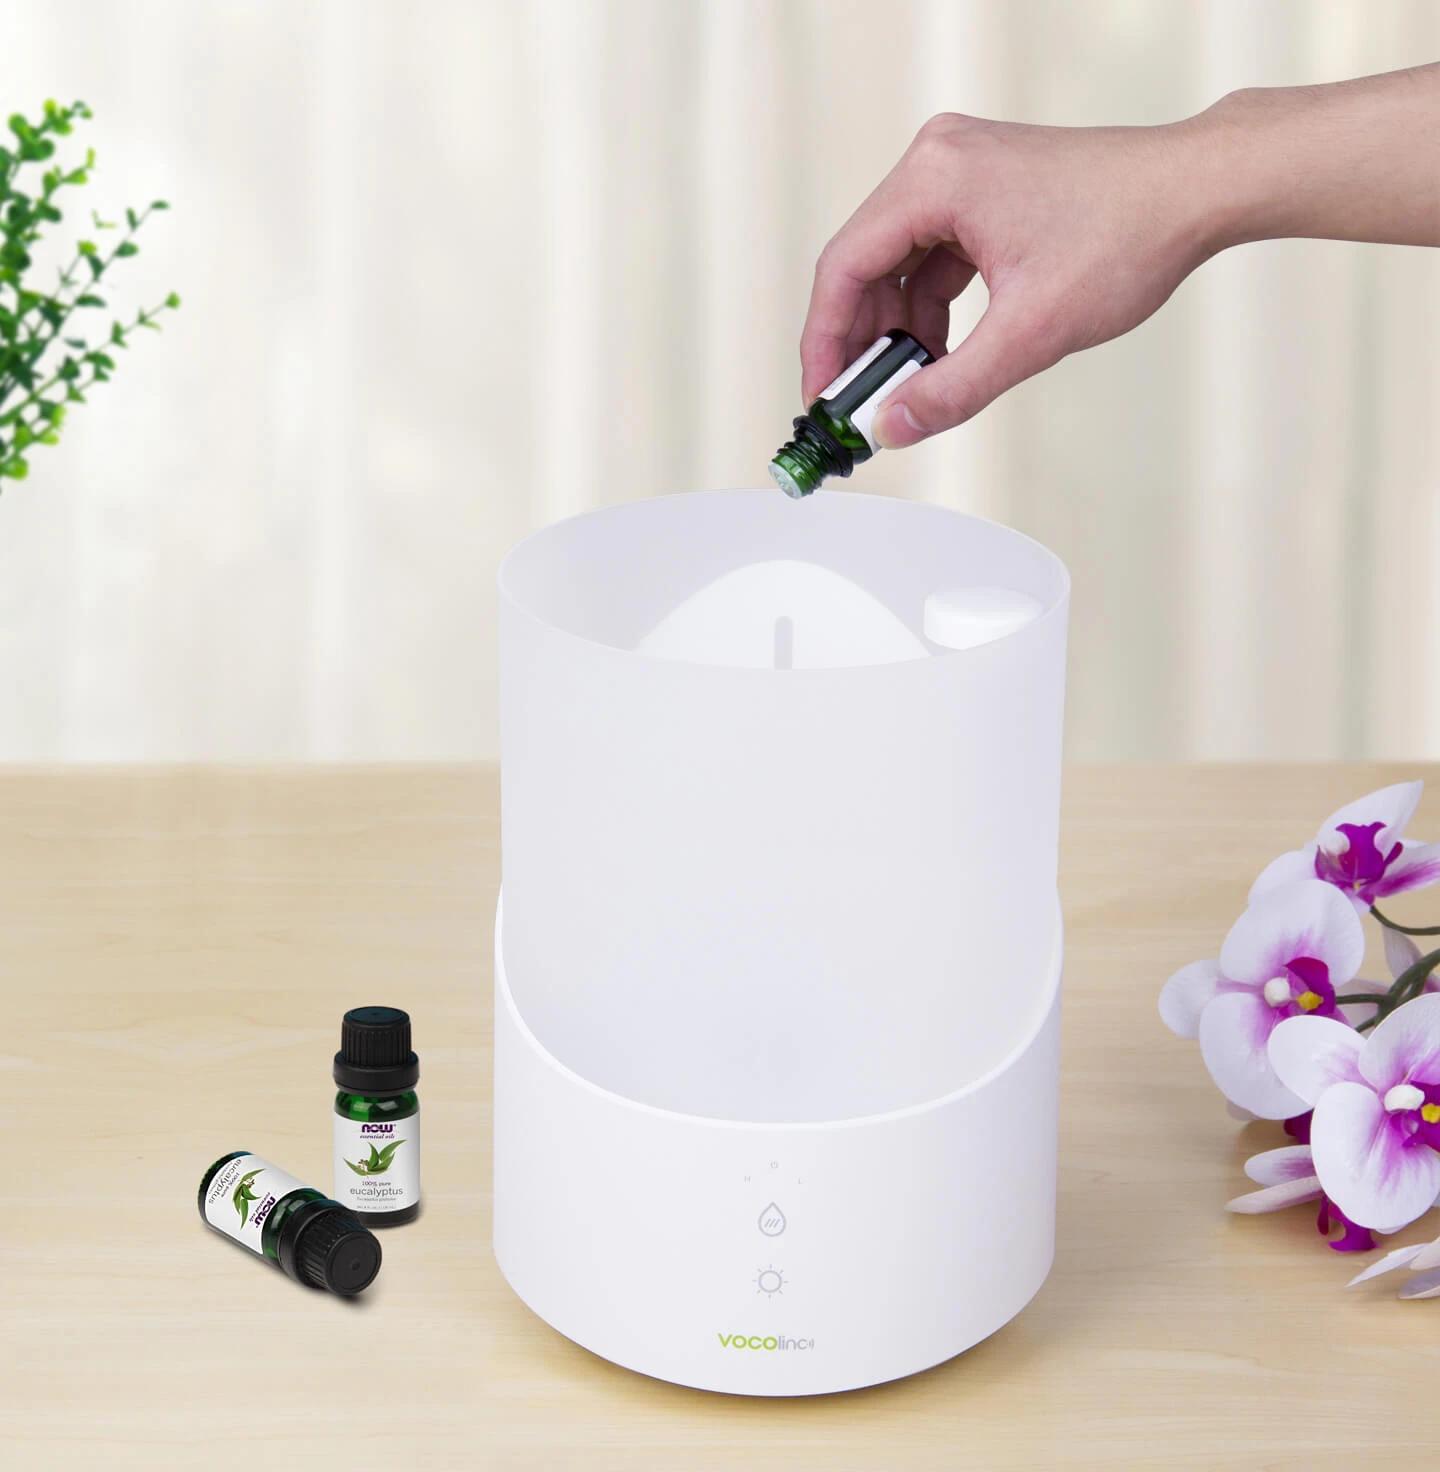 Vocolinc Cool Mist Humidifier essential oils added